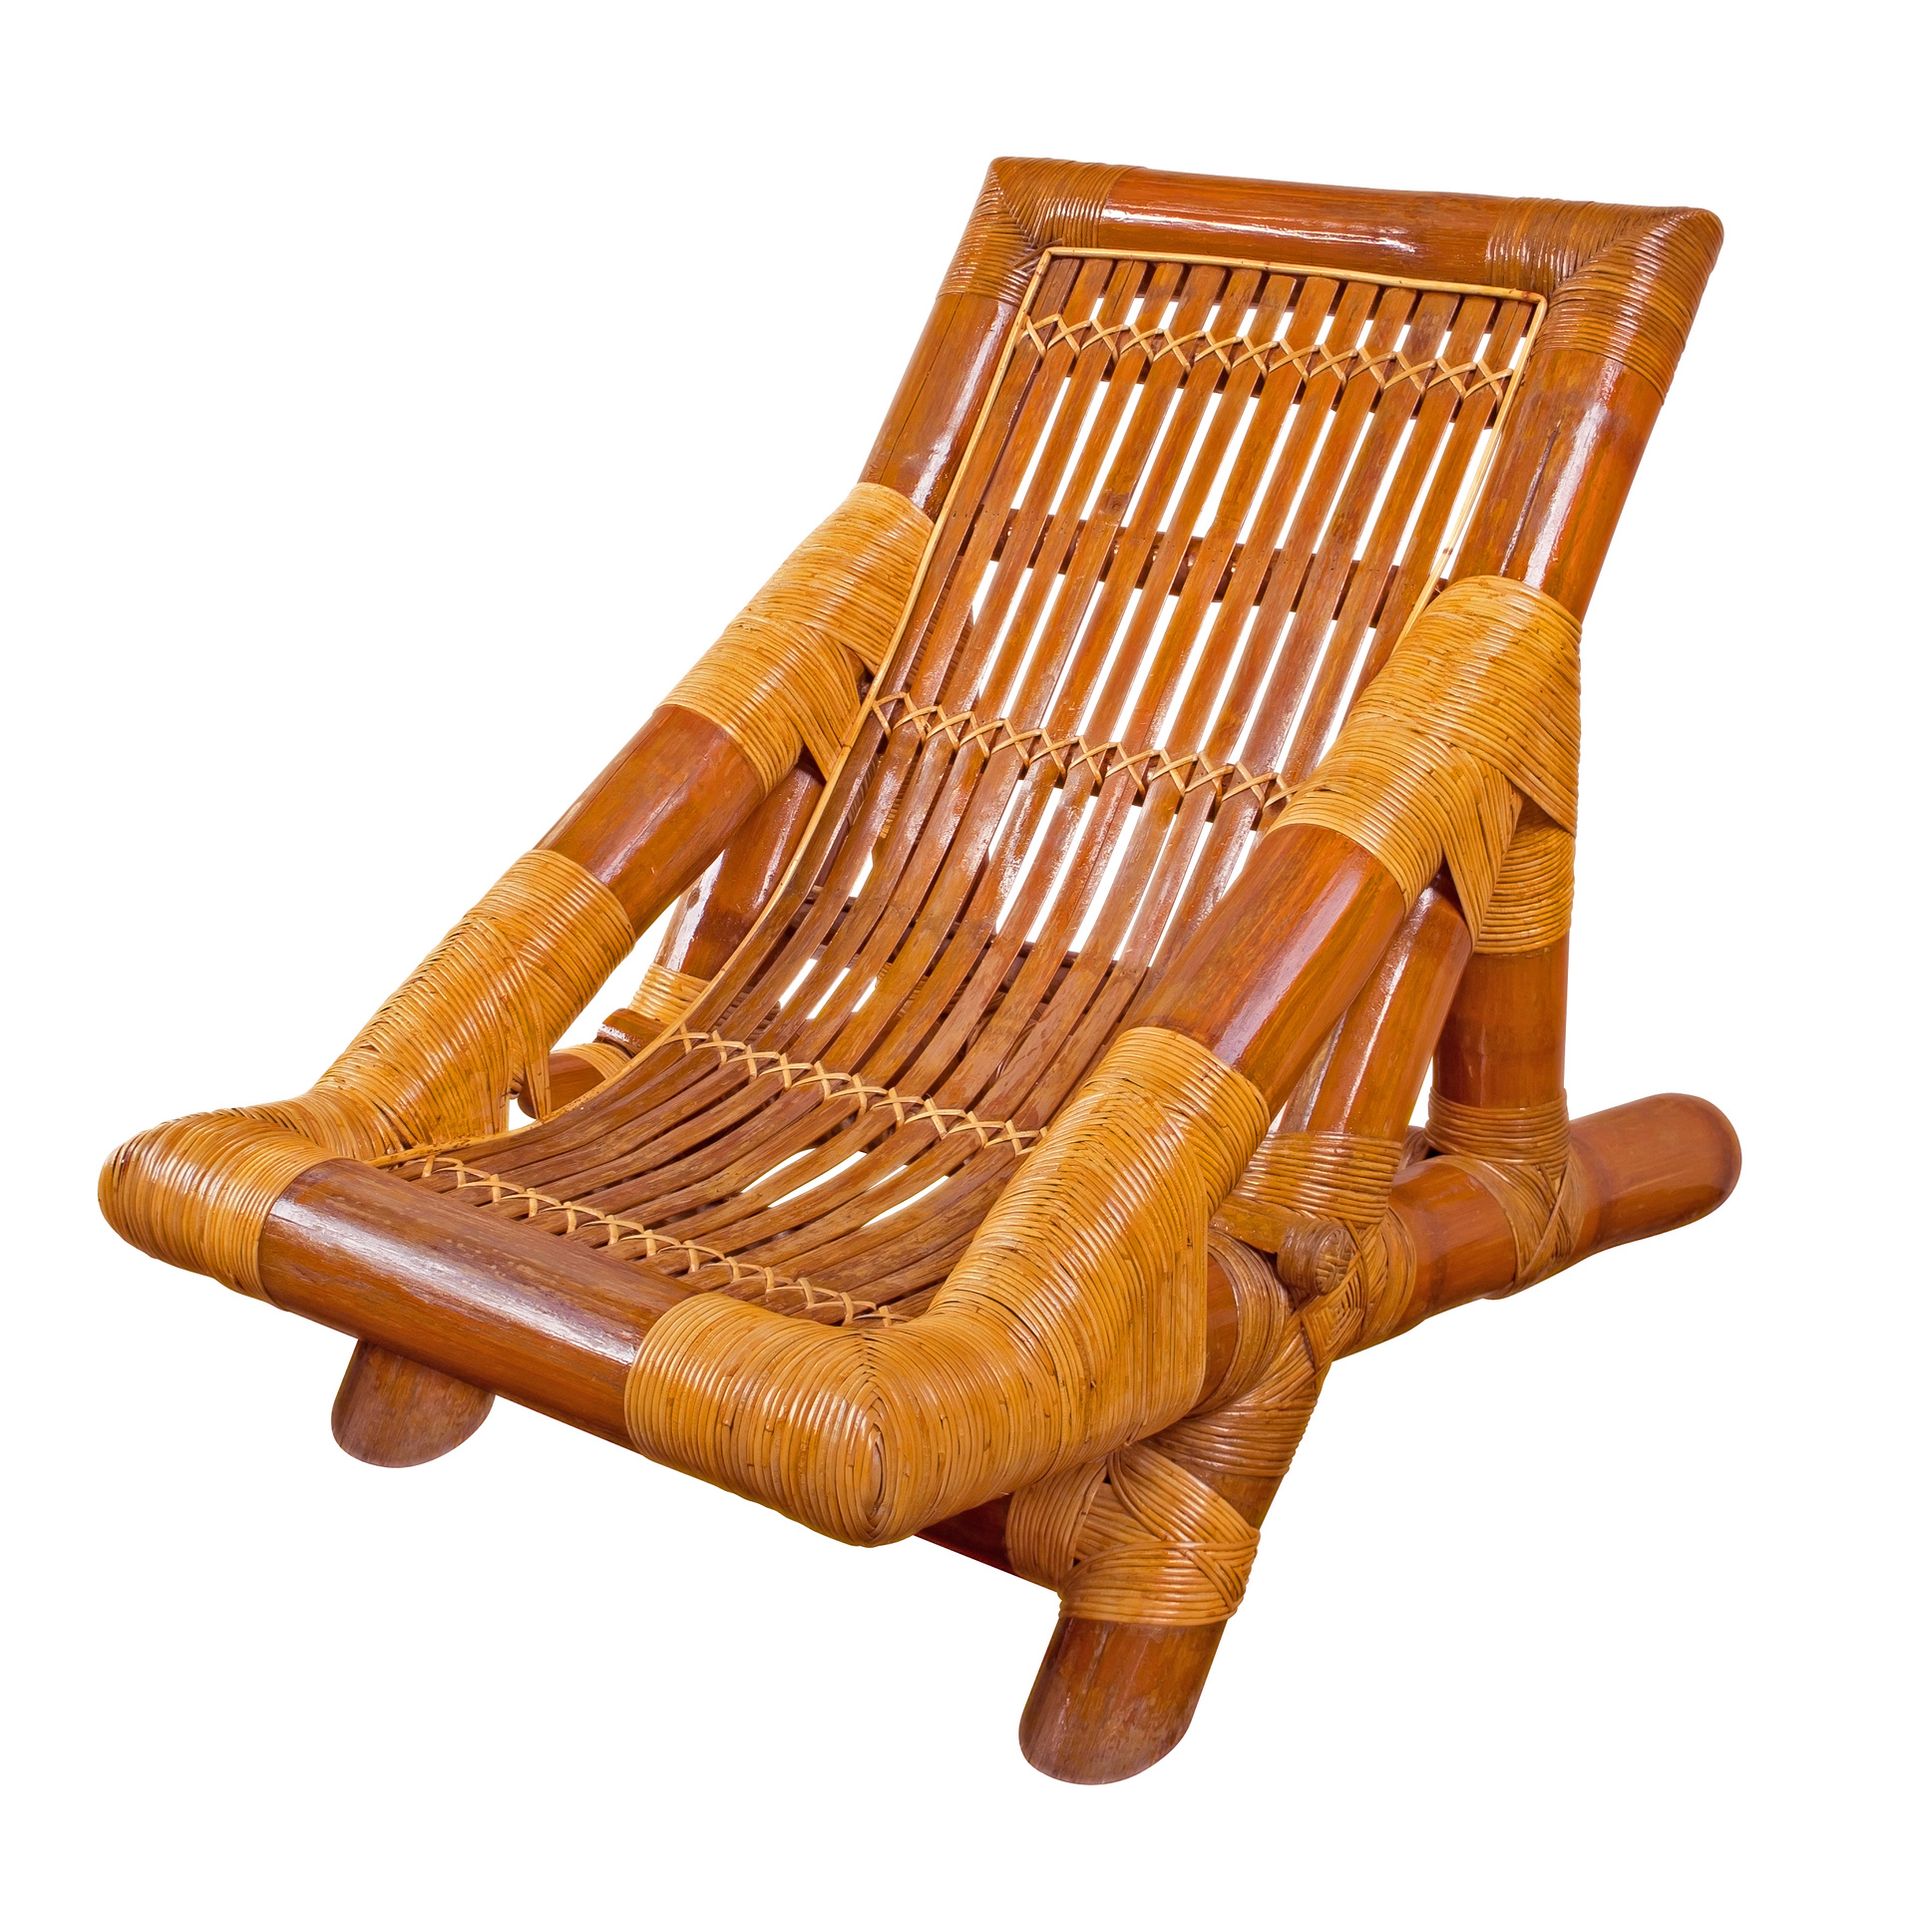 Rattan armchair isolated on white. Clipping path included.